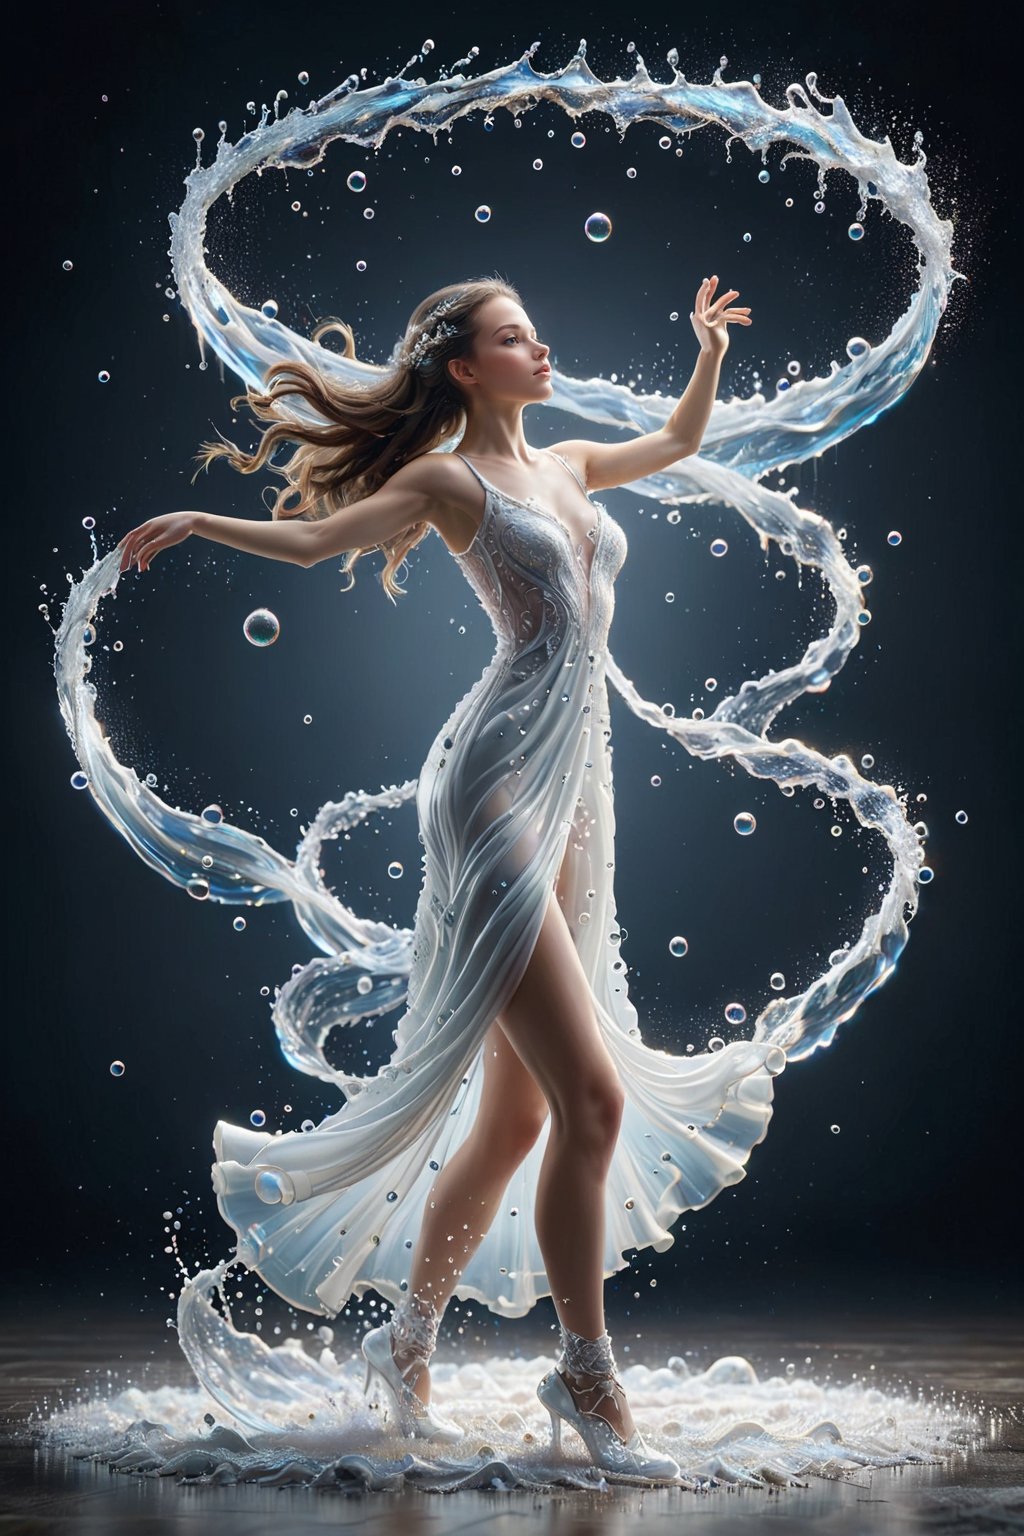 create a beautiful ukraine girl dancing with mik splash wedding dress , splashed,spray ,spray from two side  , subsurface scattering, translucent, 100mm,Movie Still,detailmaster2,Film Still,make_3d,aesthetic portrait,eyes shoot , full body , ballet pose , 1girl , beauty nose and mouth , A-line , flying wrap dress, secret,liquid dress,watce , background in dark studio , one_hand_raised , skirt vanish in another side  , dress look more liquid , tall girl , white water ,  milk white , backdround with fantasy color bubbles,eyes shoot